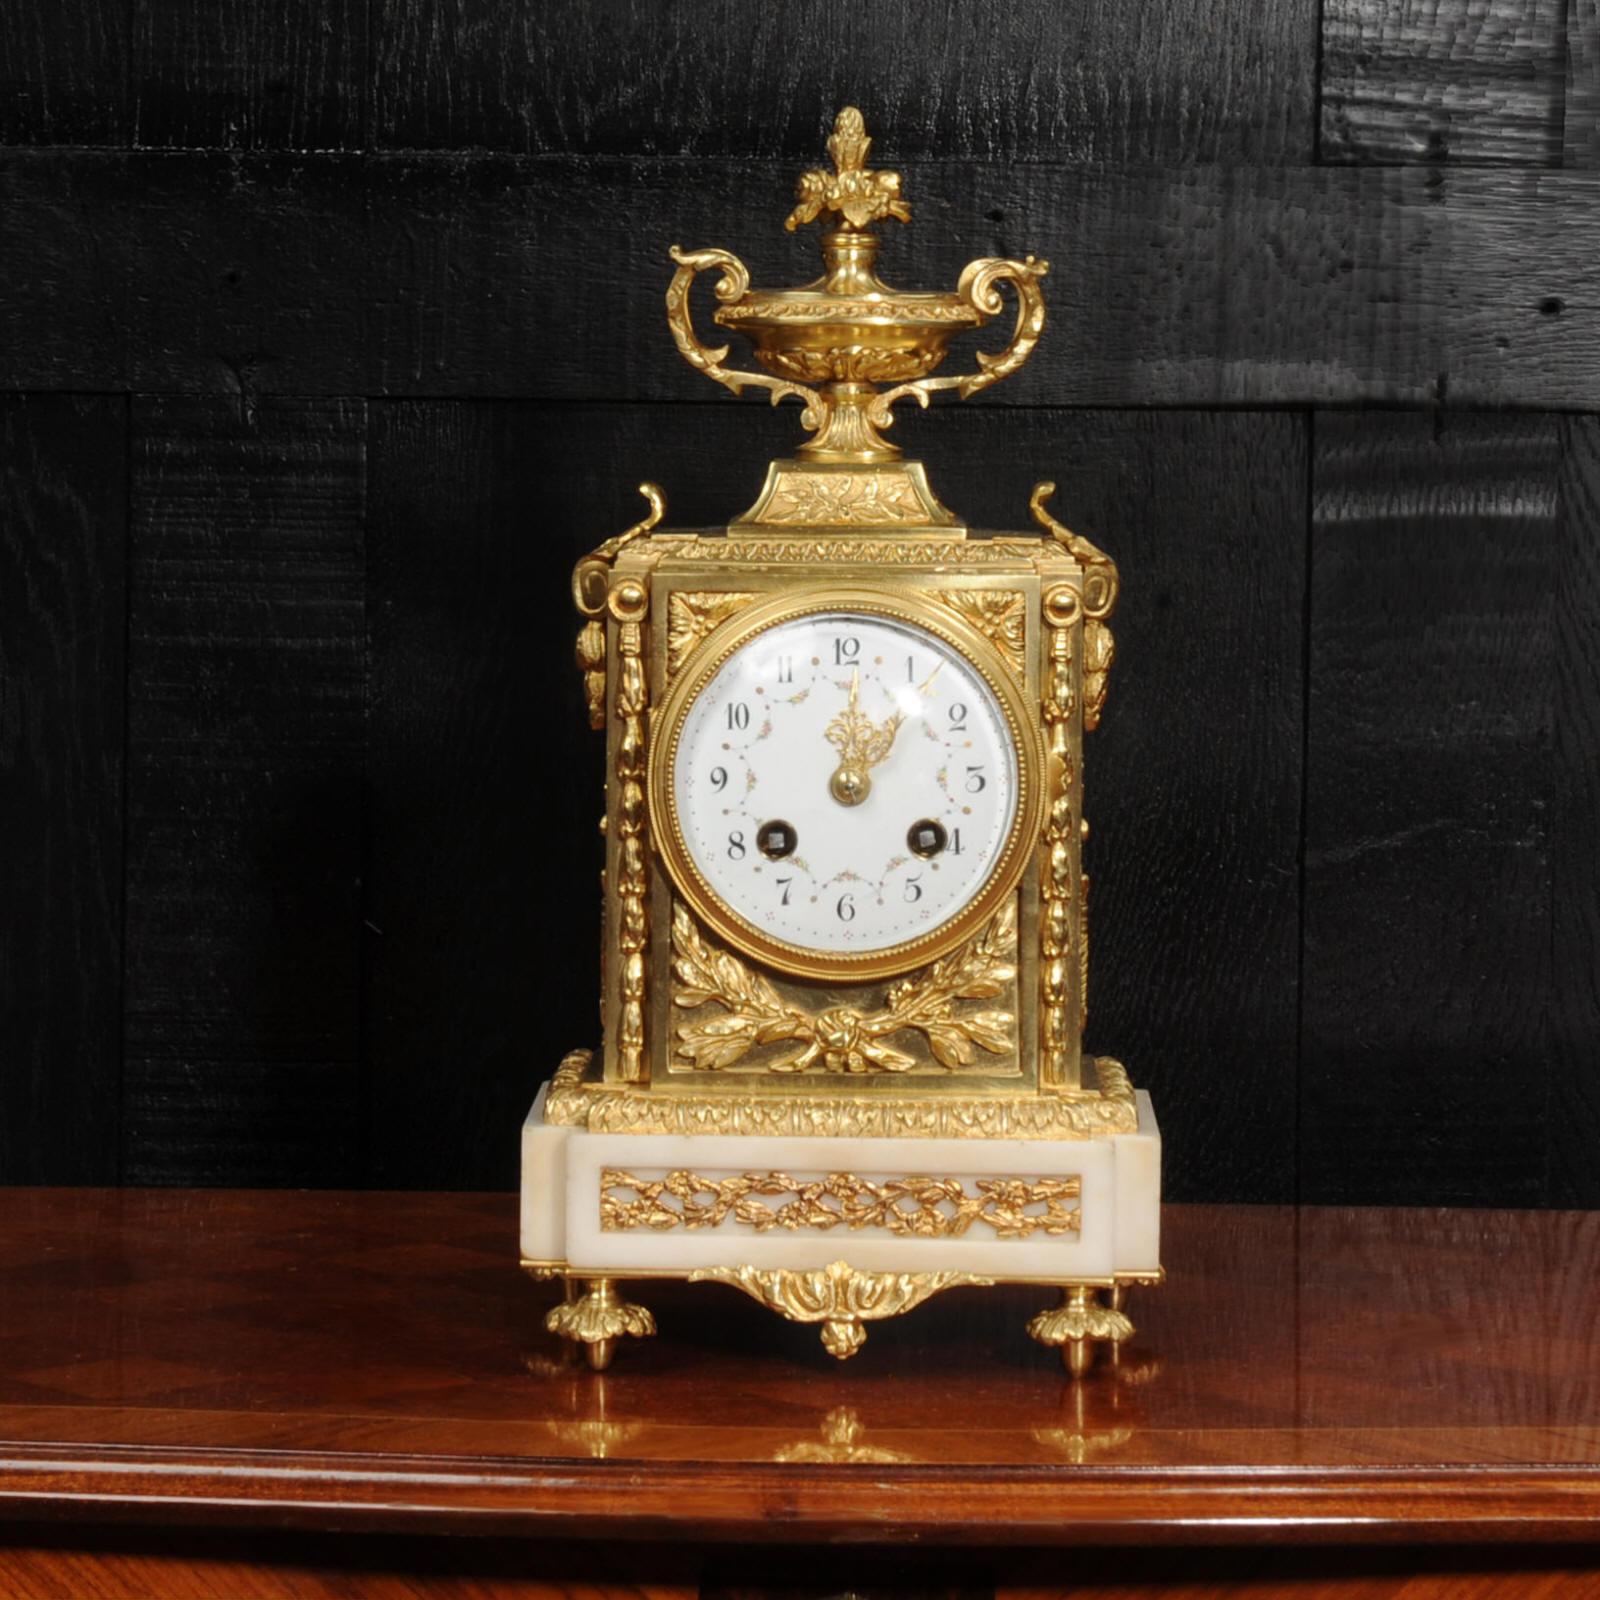 A beautiful classical clock made in the style of Louis XVI by Samuel Marti. Stunning ormolu (finely gilded bronze) mounted on a marble base. It is decorated with an inset laurel swag, trailing acanthus and a classical motif to the sides. To the top